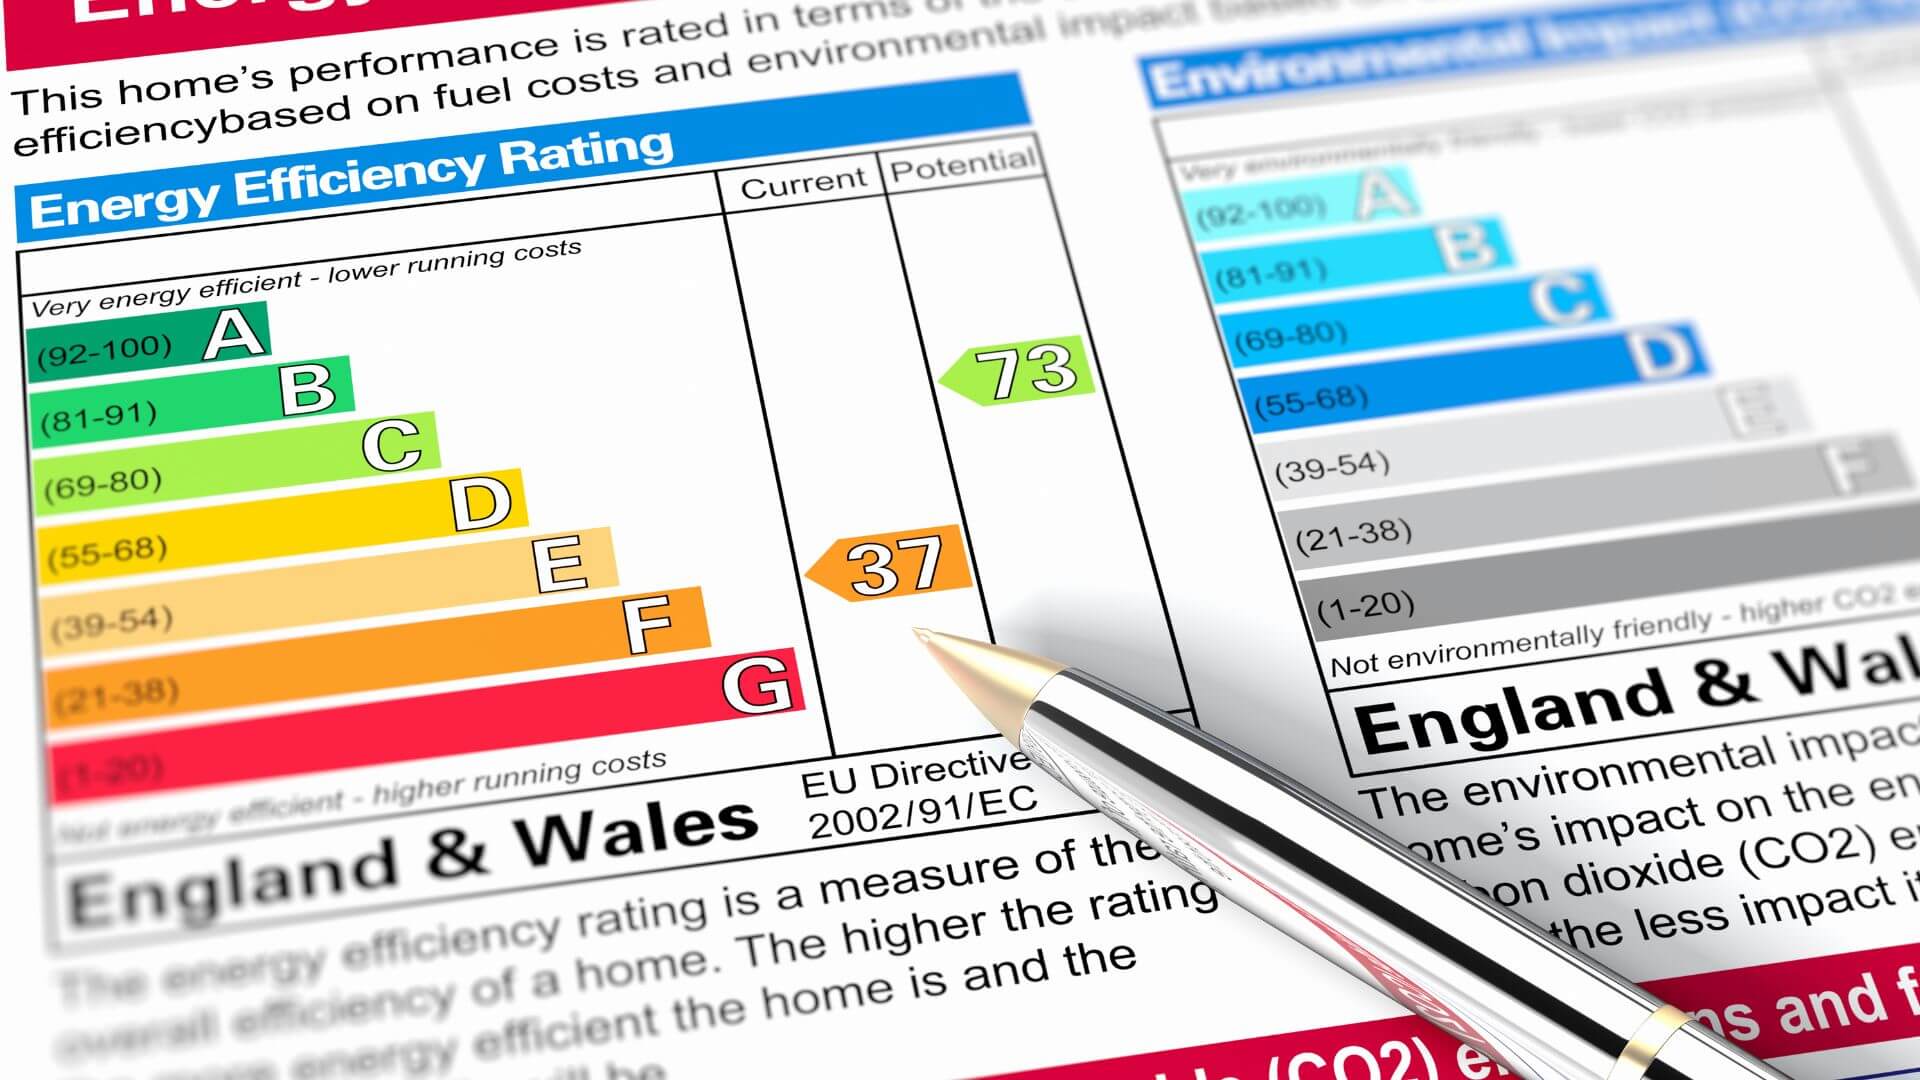 The UK Energy Performance Certificate